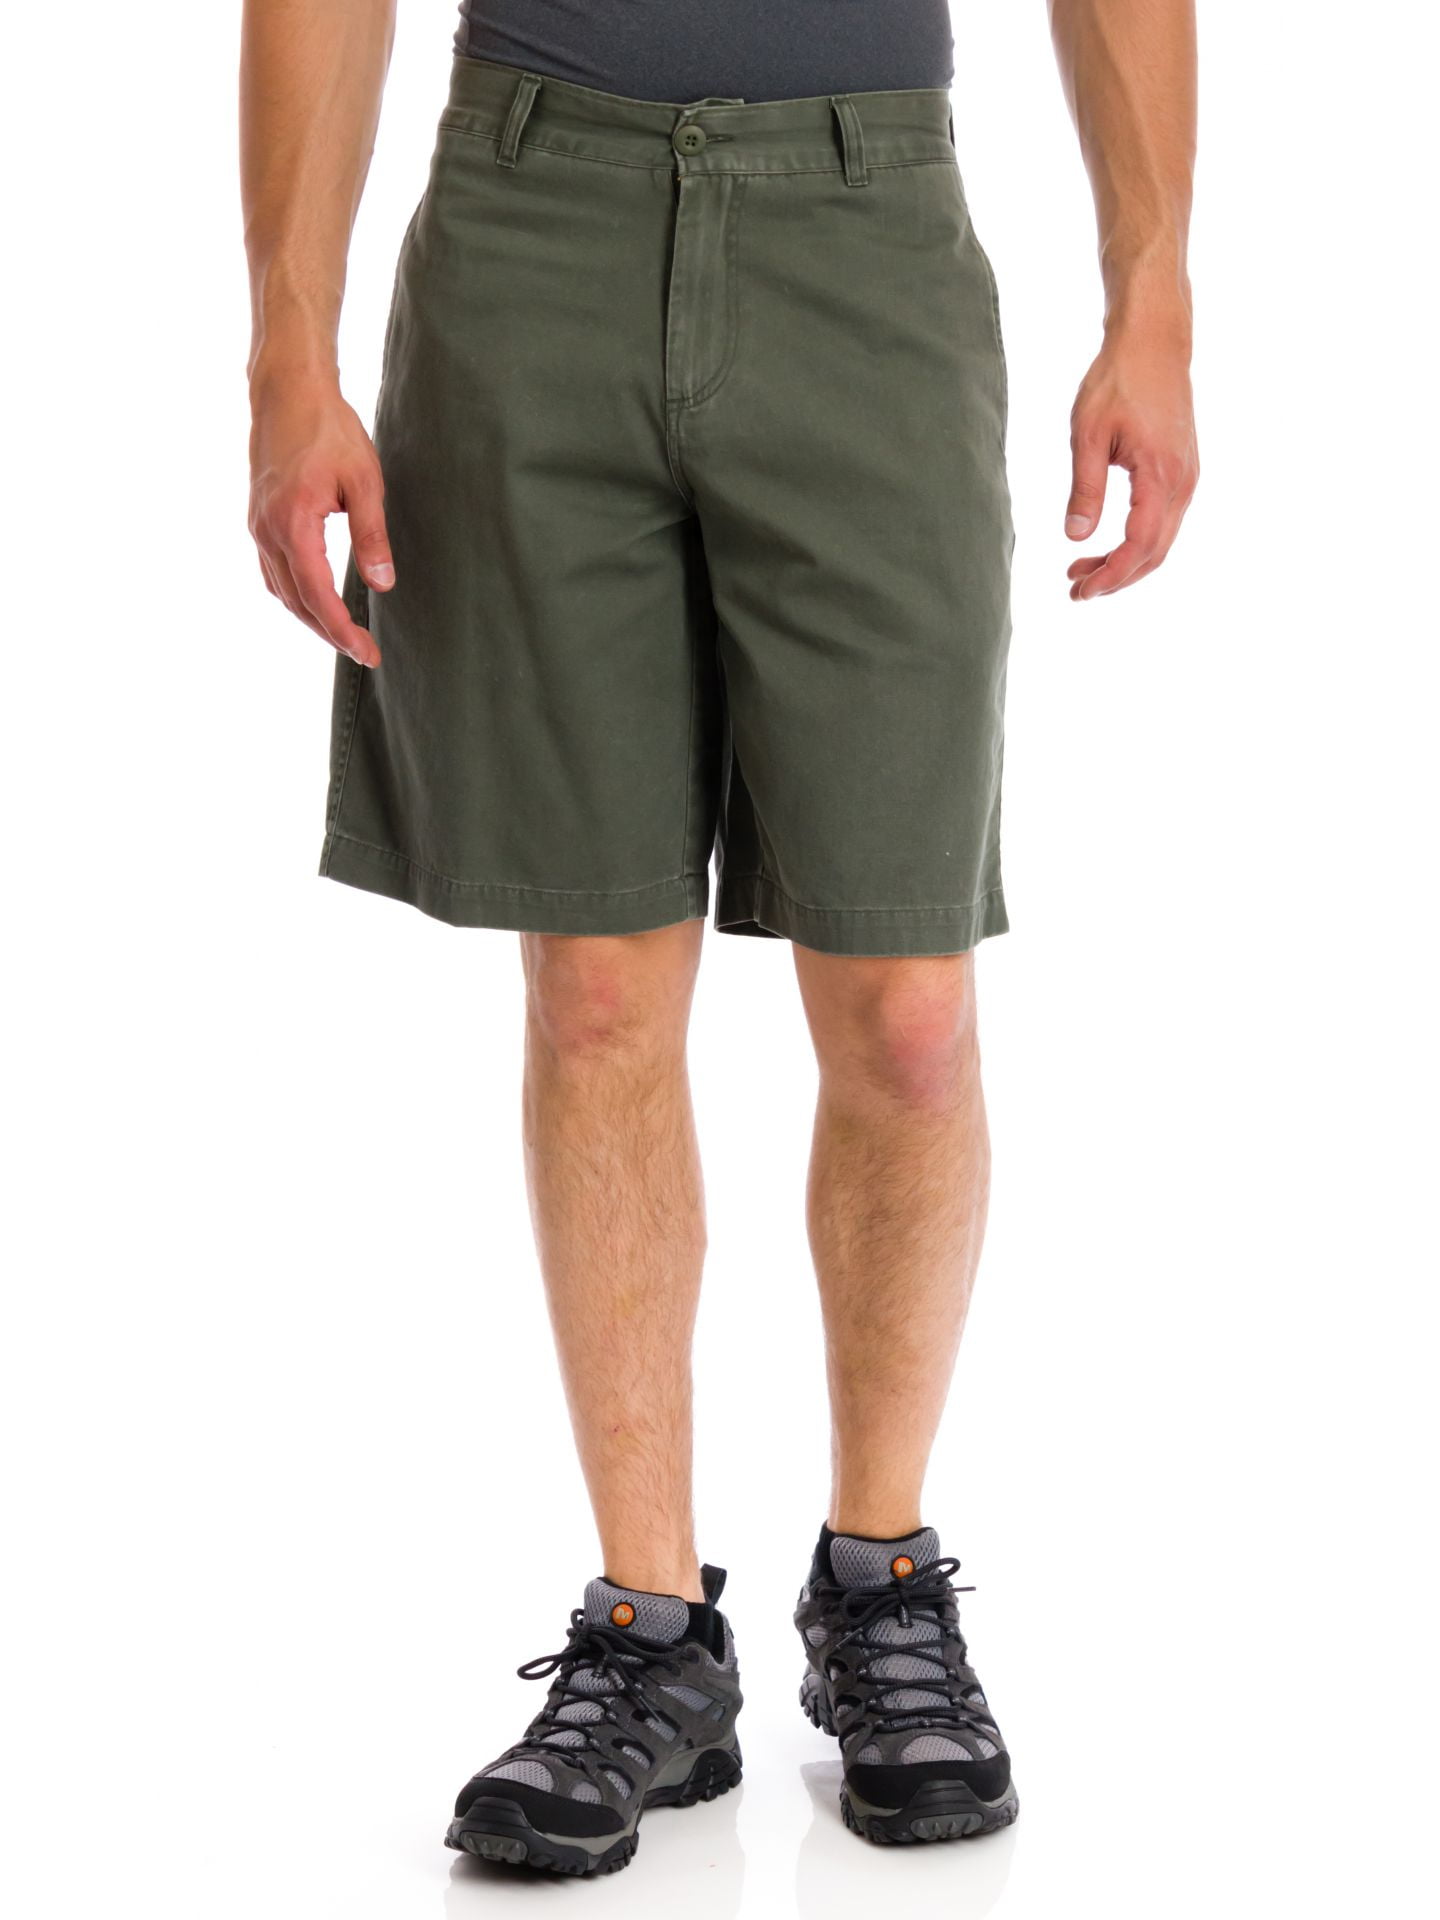 Olive Drab Green Military BDU Combat Cargo Shorts 100% Cotton Rip Stop 7053 